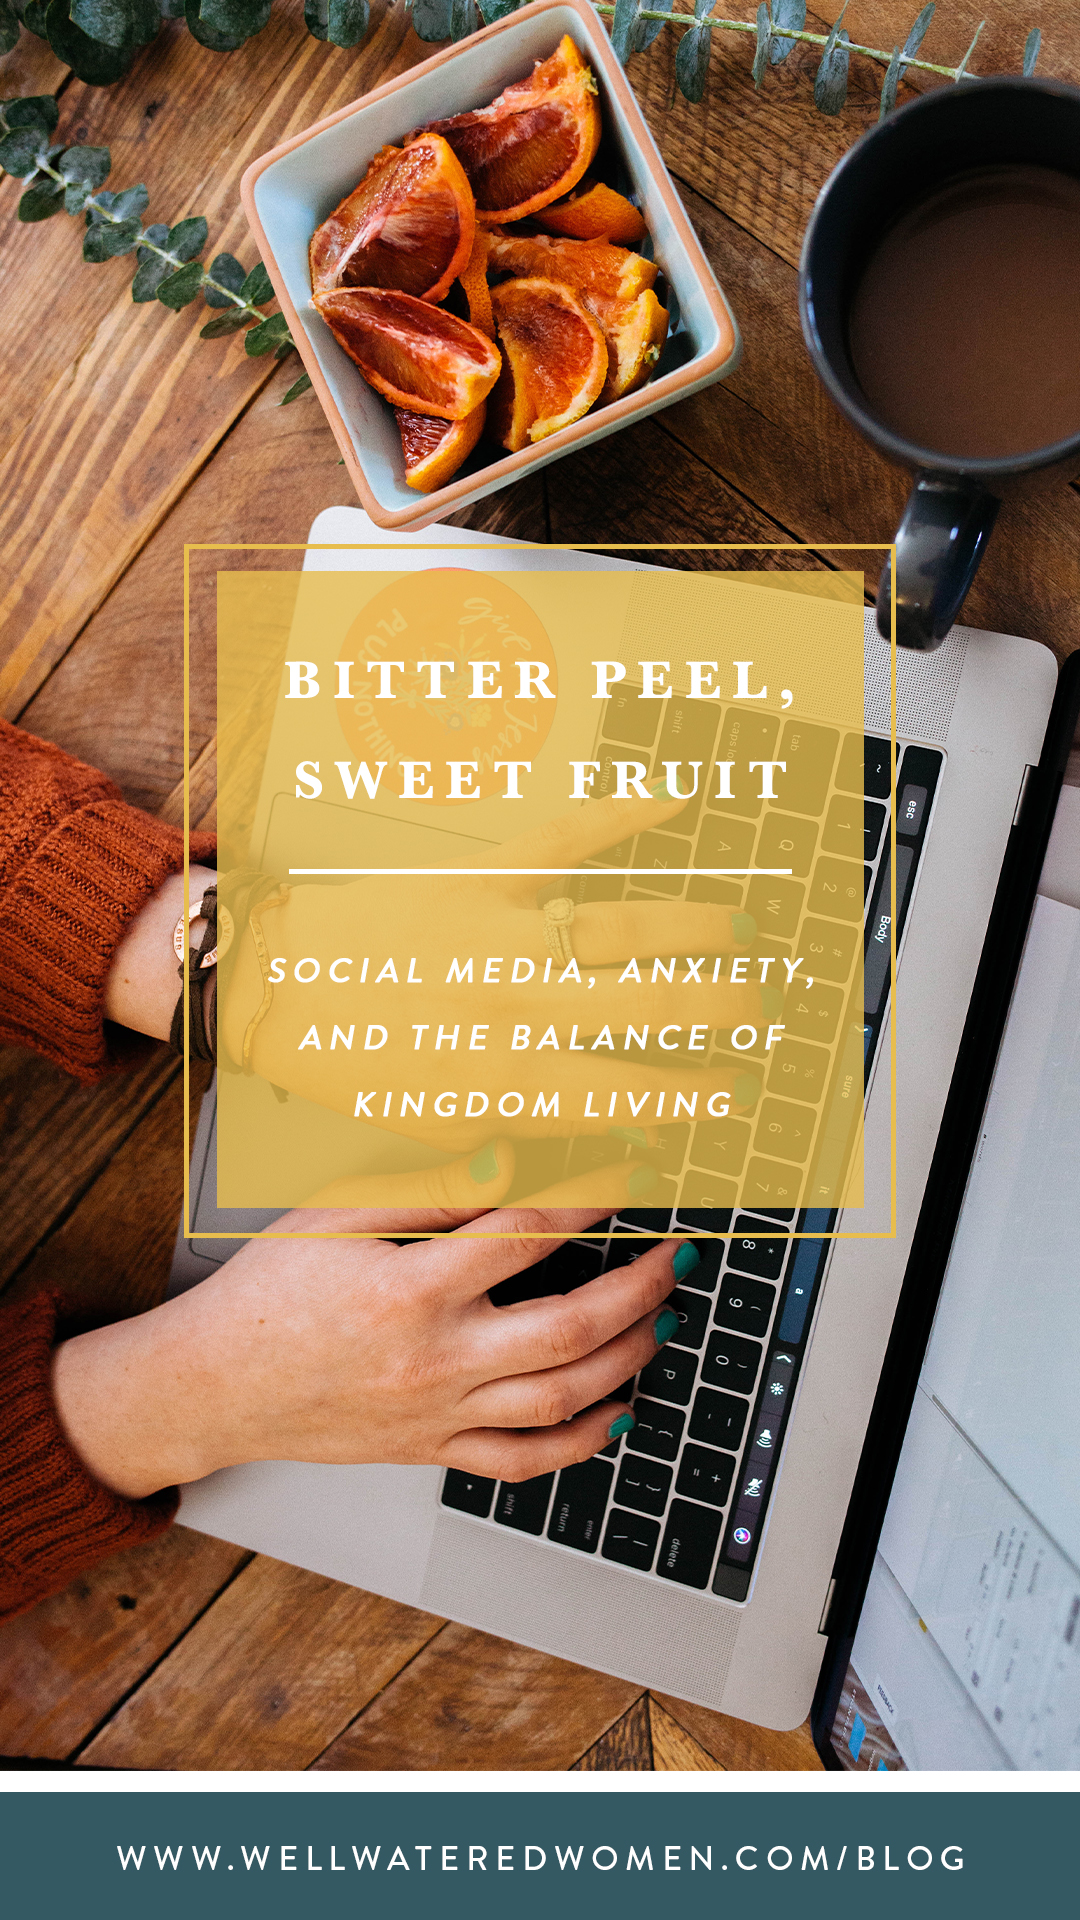 Social Media, Anxiety, and The Balance of Kingdom Living: Friends, I have a theory that at least some (if not more) of my anxiety begins with my social media use. Maybe you can relate. Maybe you can remember a time when the simple click of a button caused your heart rate to rise. Maybe you can think of a time when a simple picture left you chewing your bottom lip anxiously.